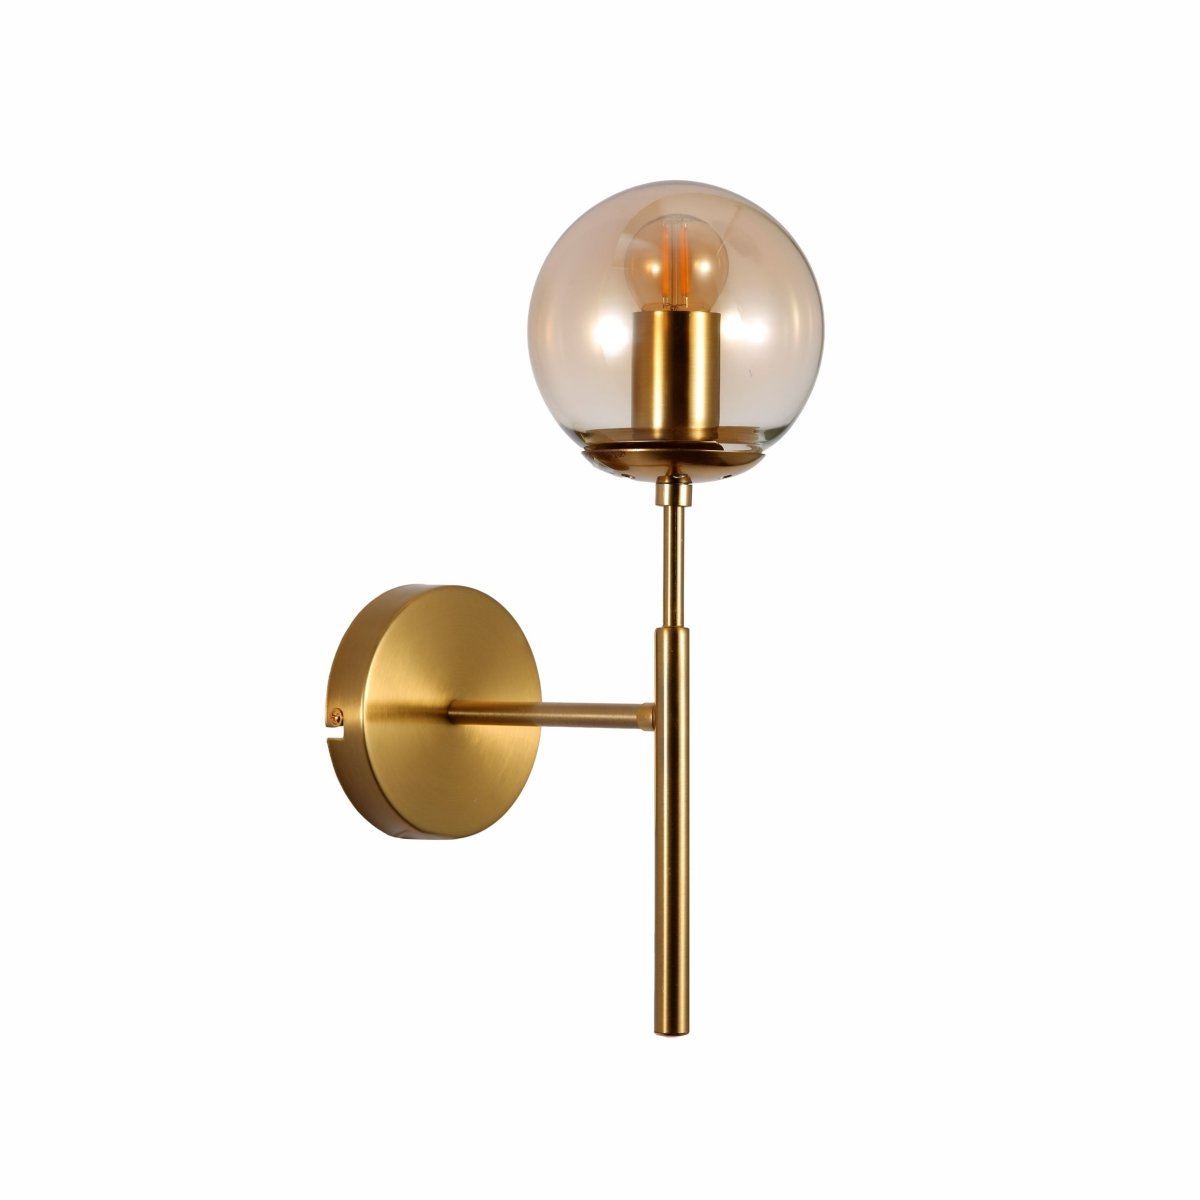 Main image of Amber Glass Gold Metal Wall Light with E27 Fitting | TEKLED 151-19716